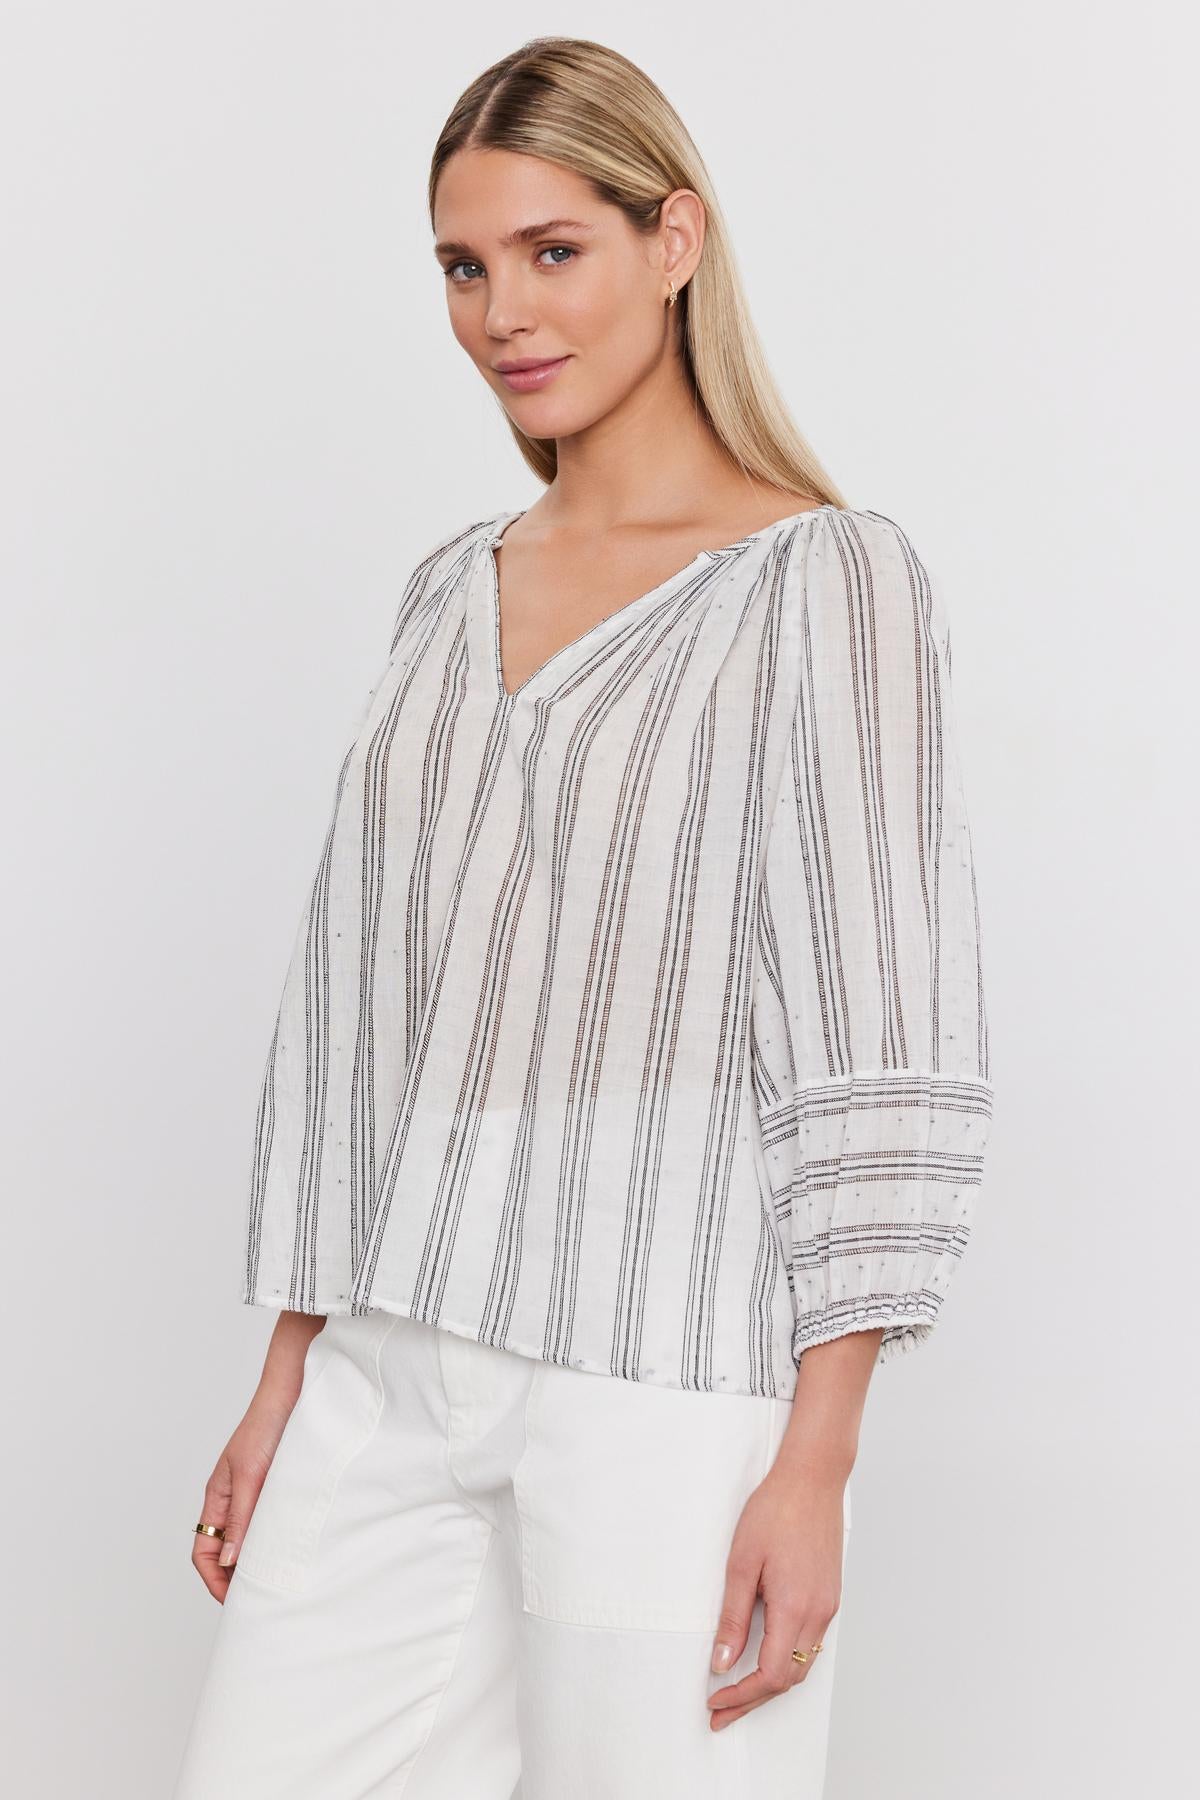 A woman models a white and grey striped cotton Gianna top with three-quarter sleeves and elastic cuffs, paired with white pants, against a plain background by Velvet by Graham & Spencer.-36910245937345